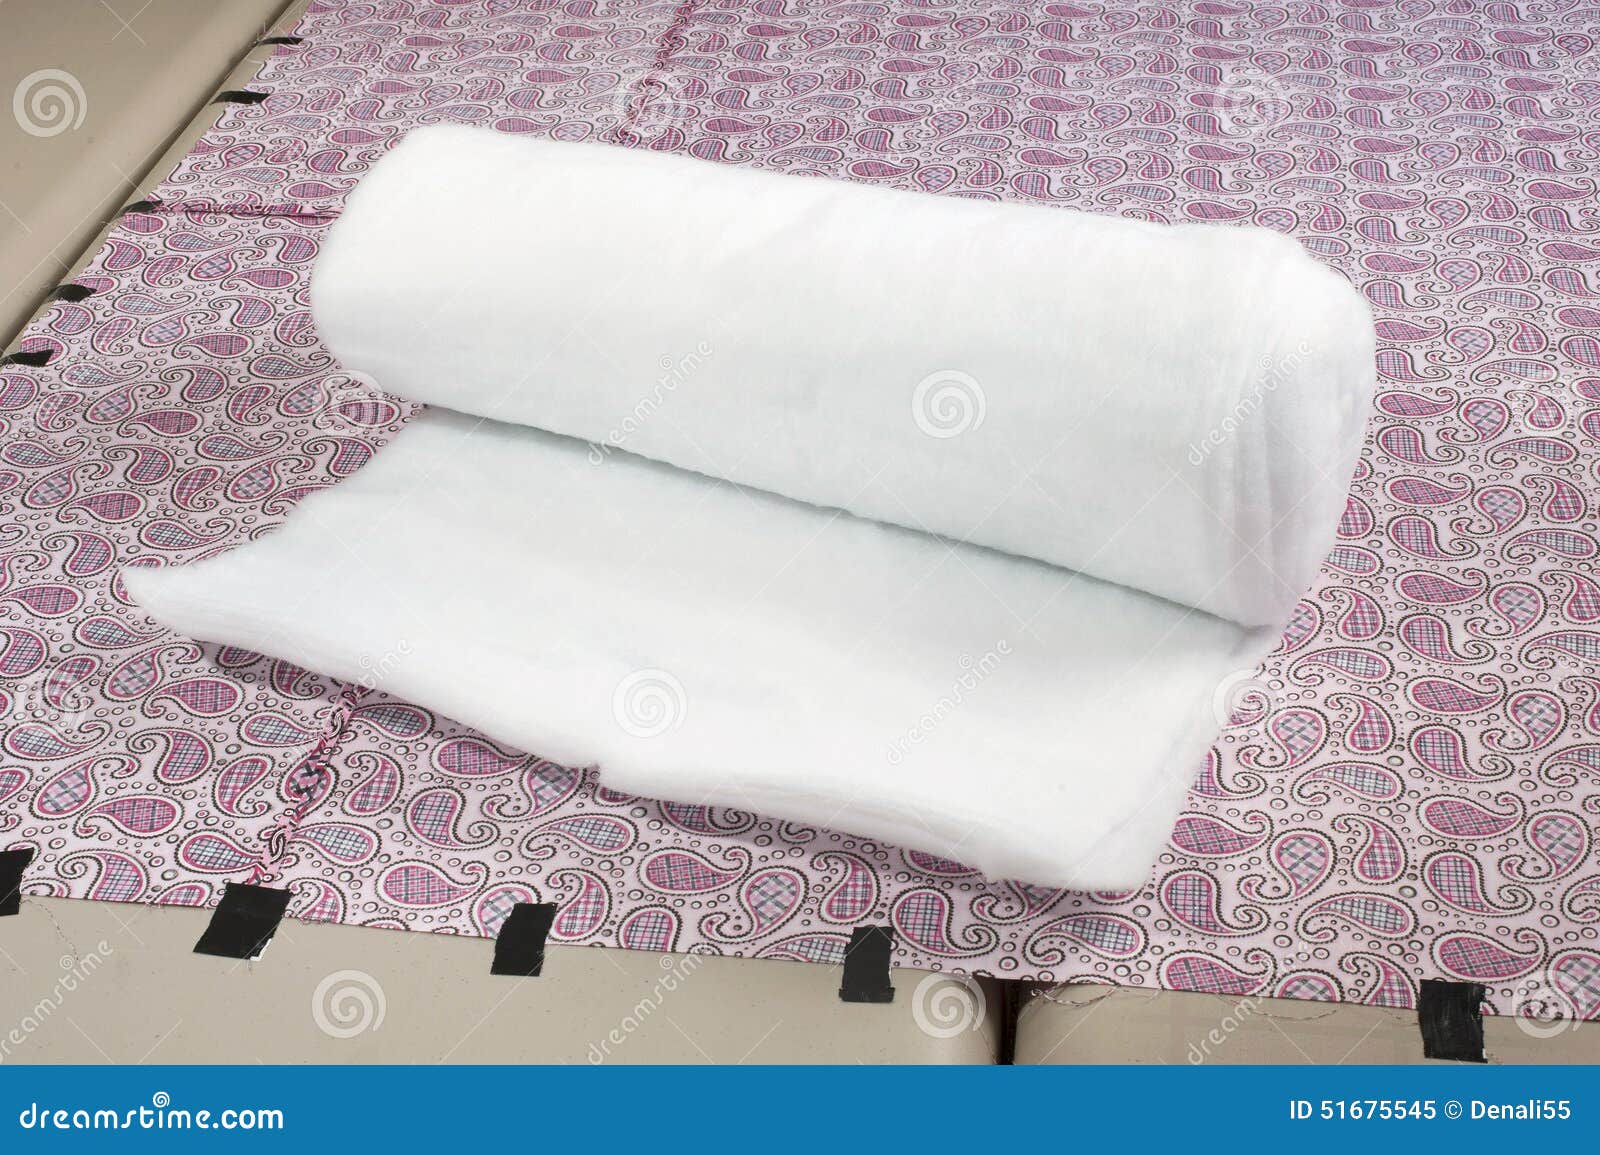 Roll of batting. stock image. Image of layer, layering - 51675545